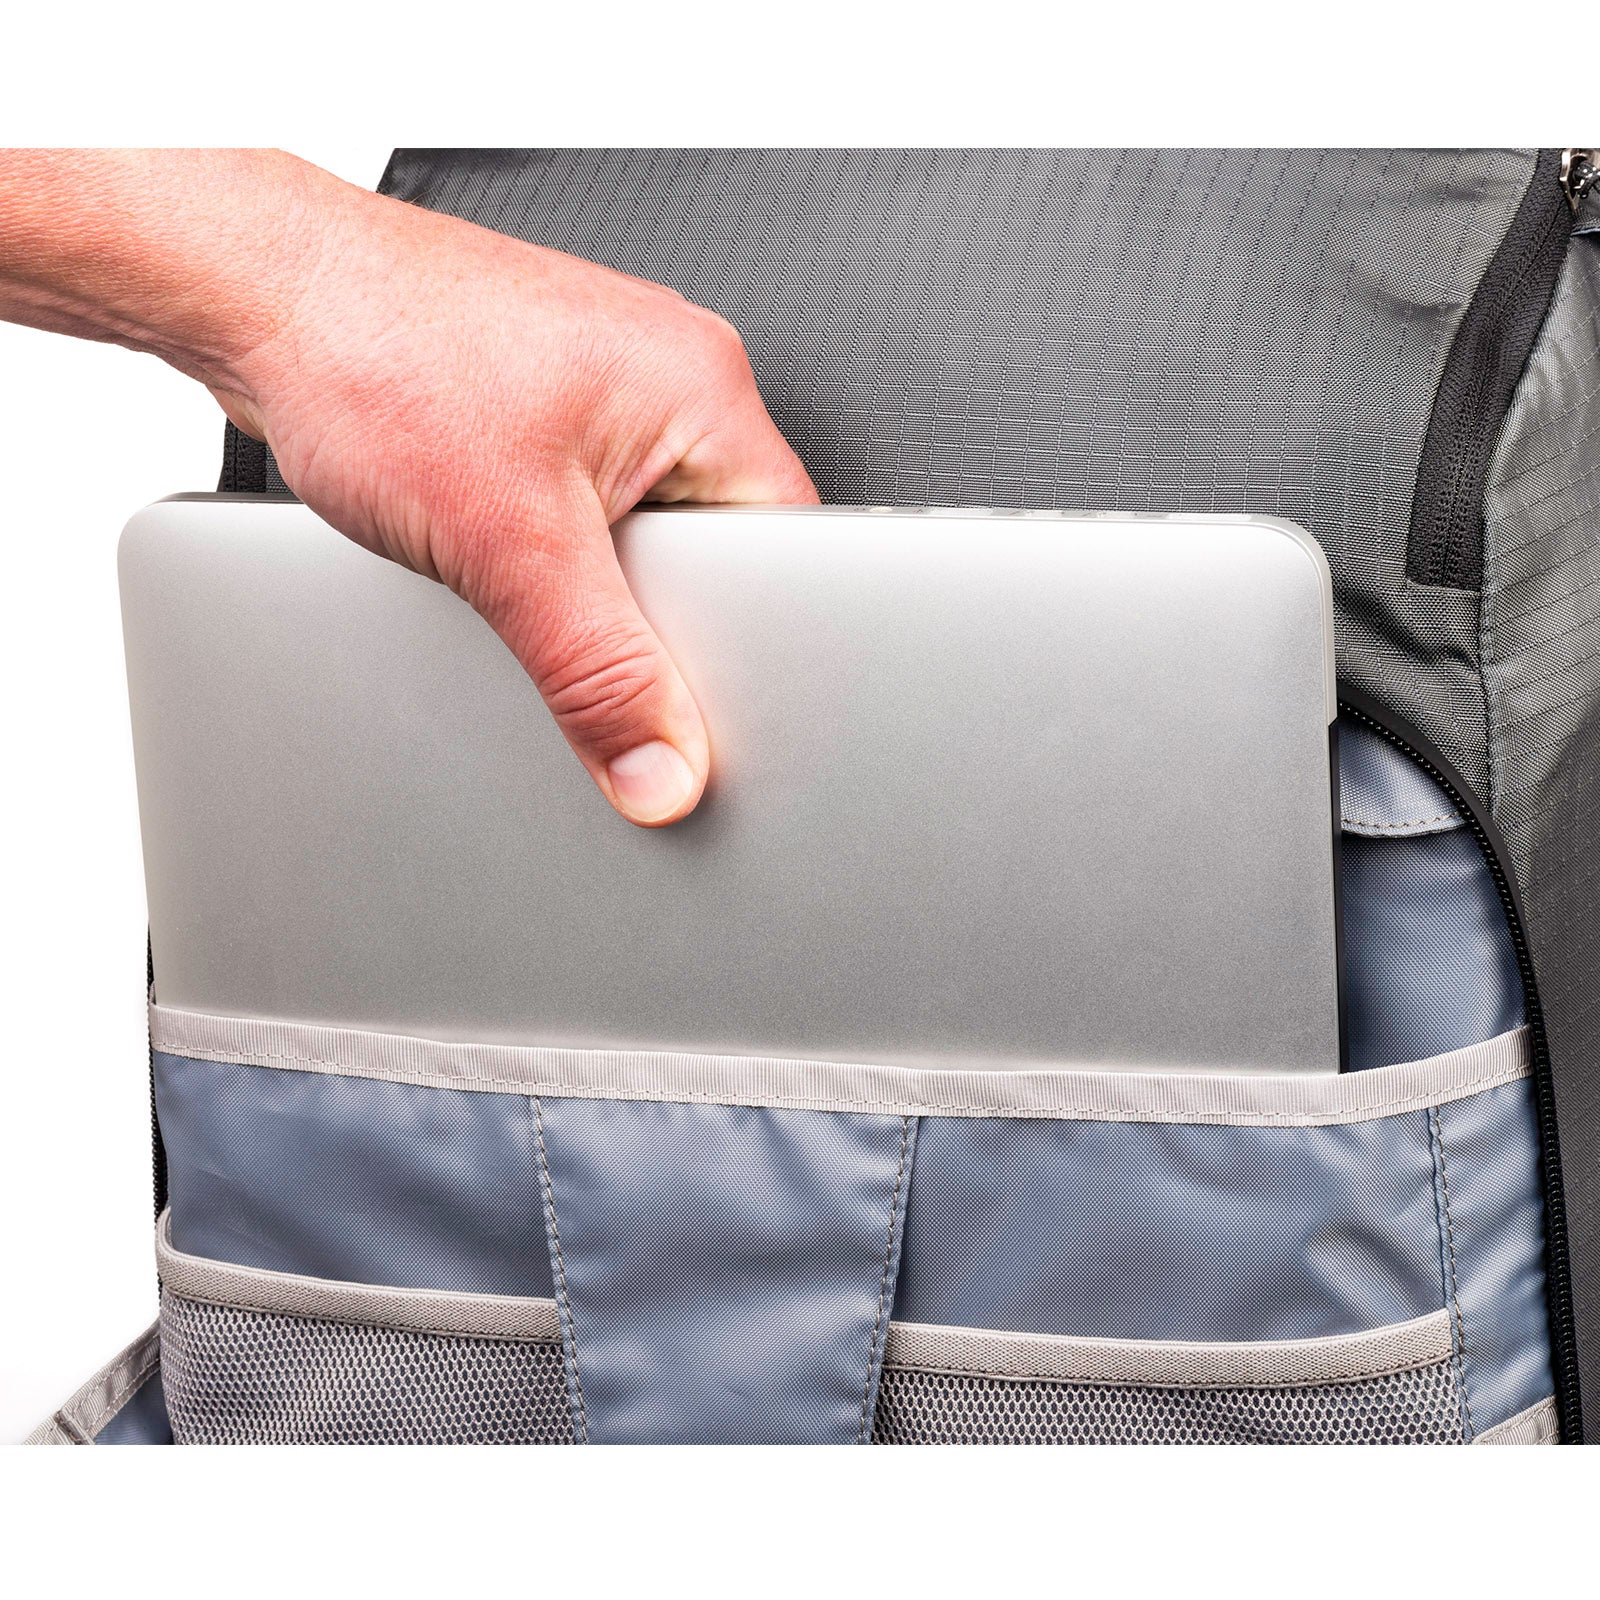 Dedicated compartments fit up to a 17” laptop and a 10” tablet